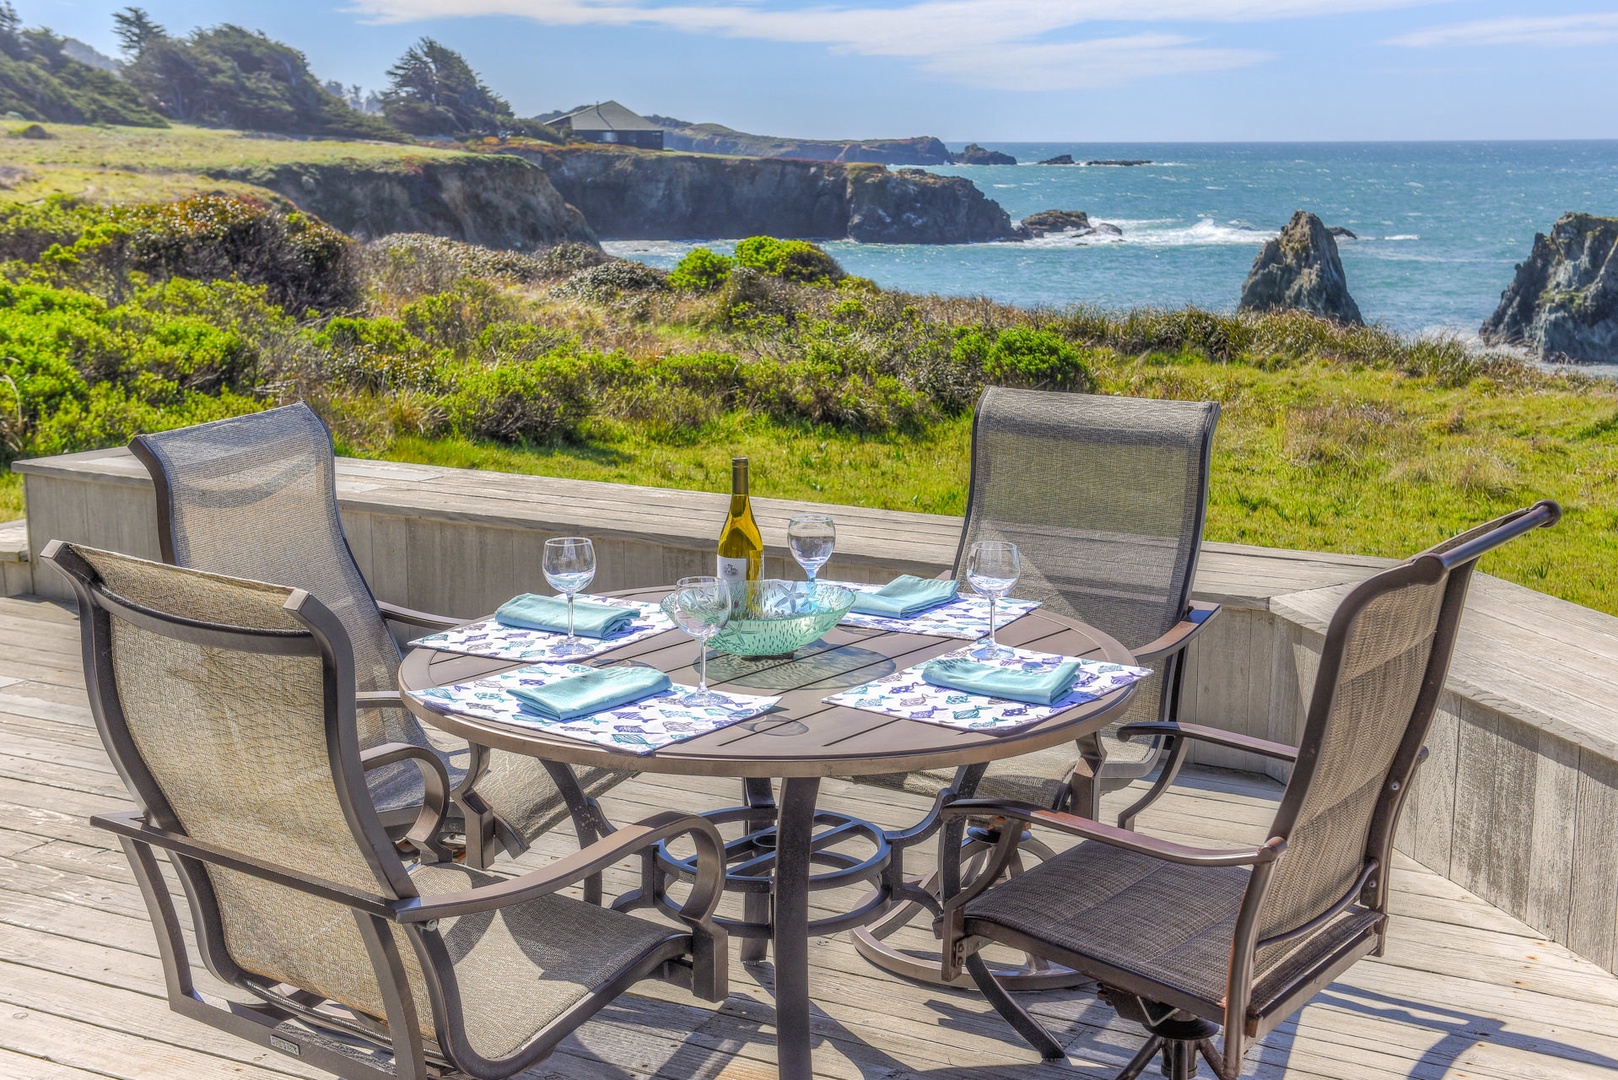 Amazing panoramic ocean views with outdoor dining and seating for 4